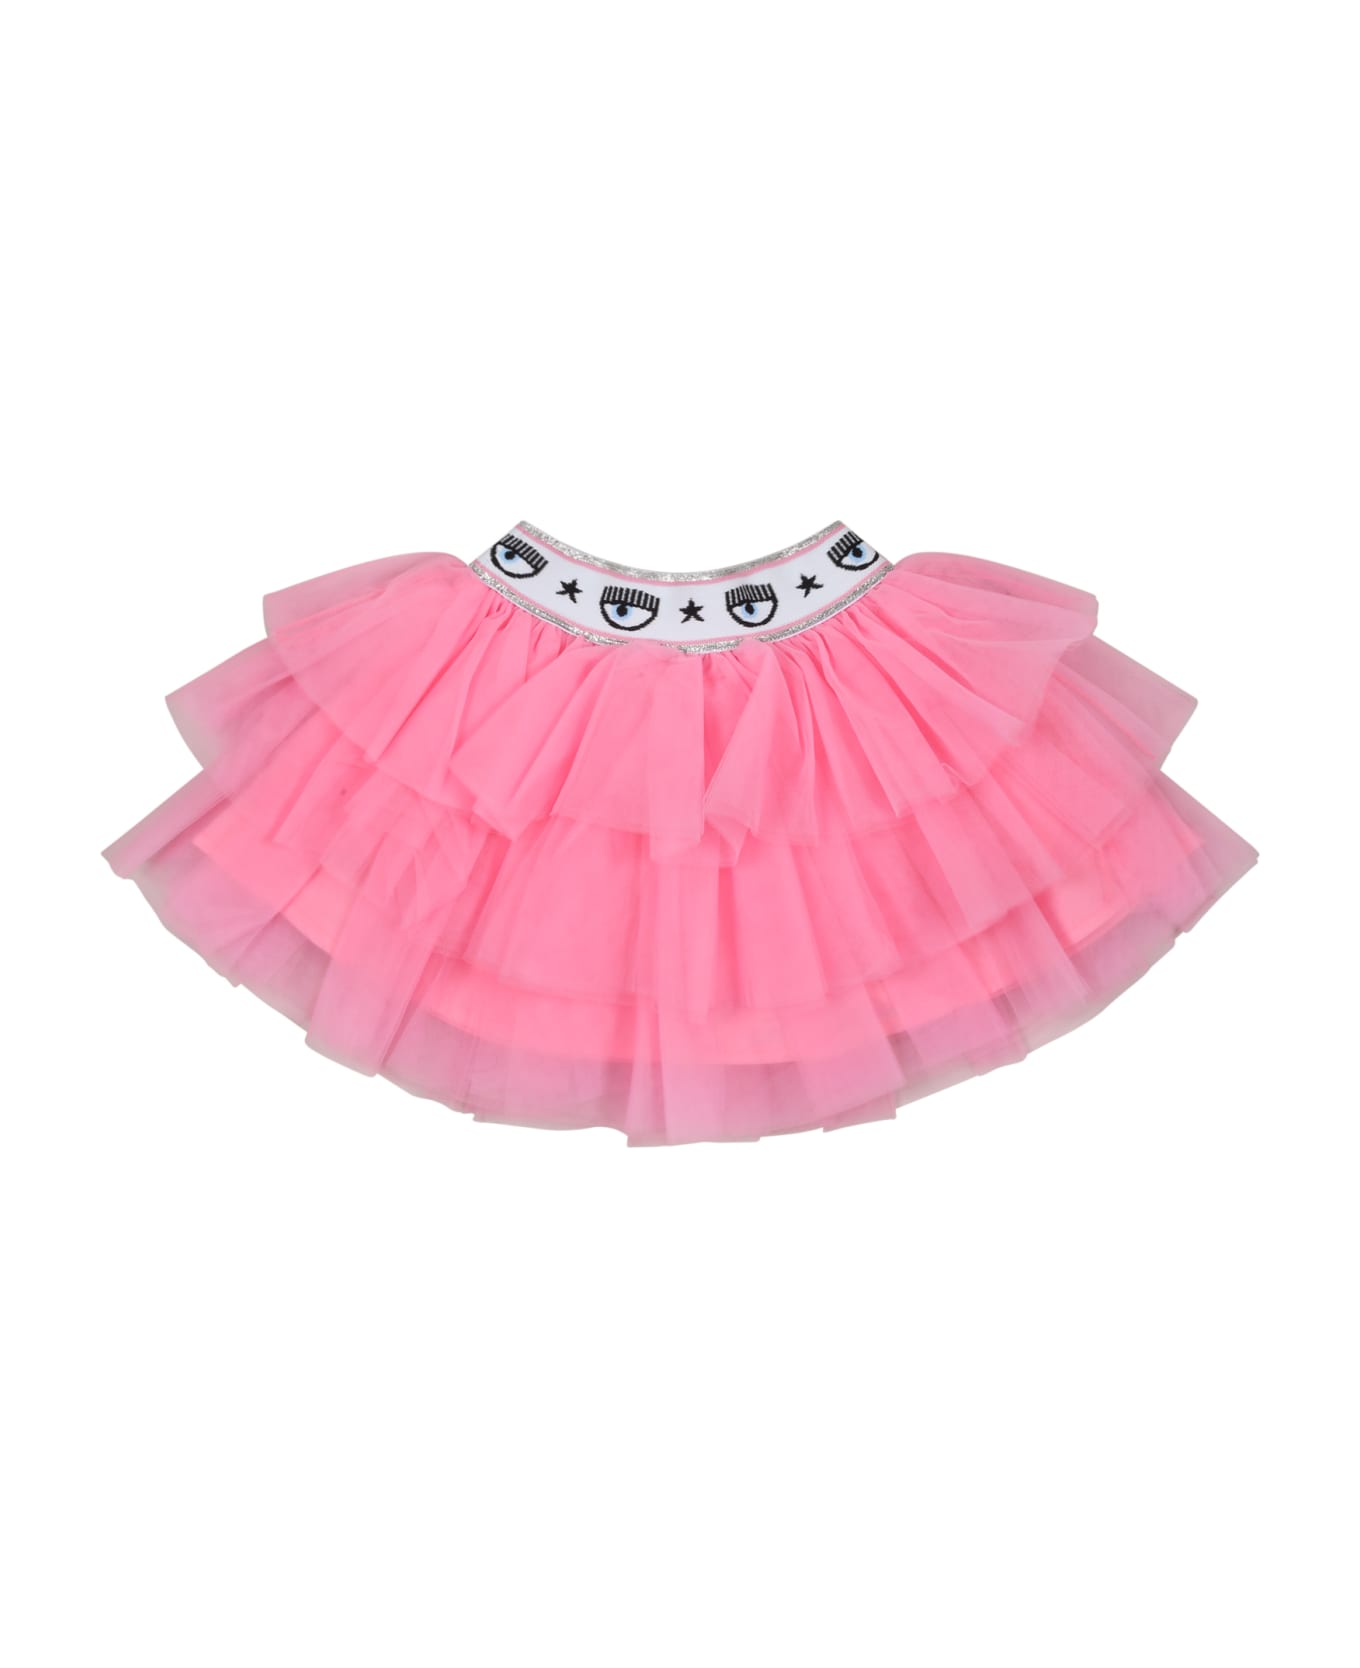 Chiara Ferragni Pink Skirt For Baby Girl With Winks - Pink